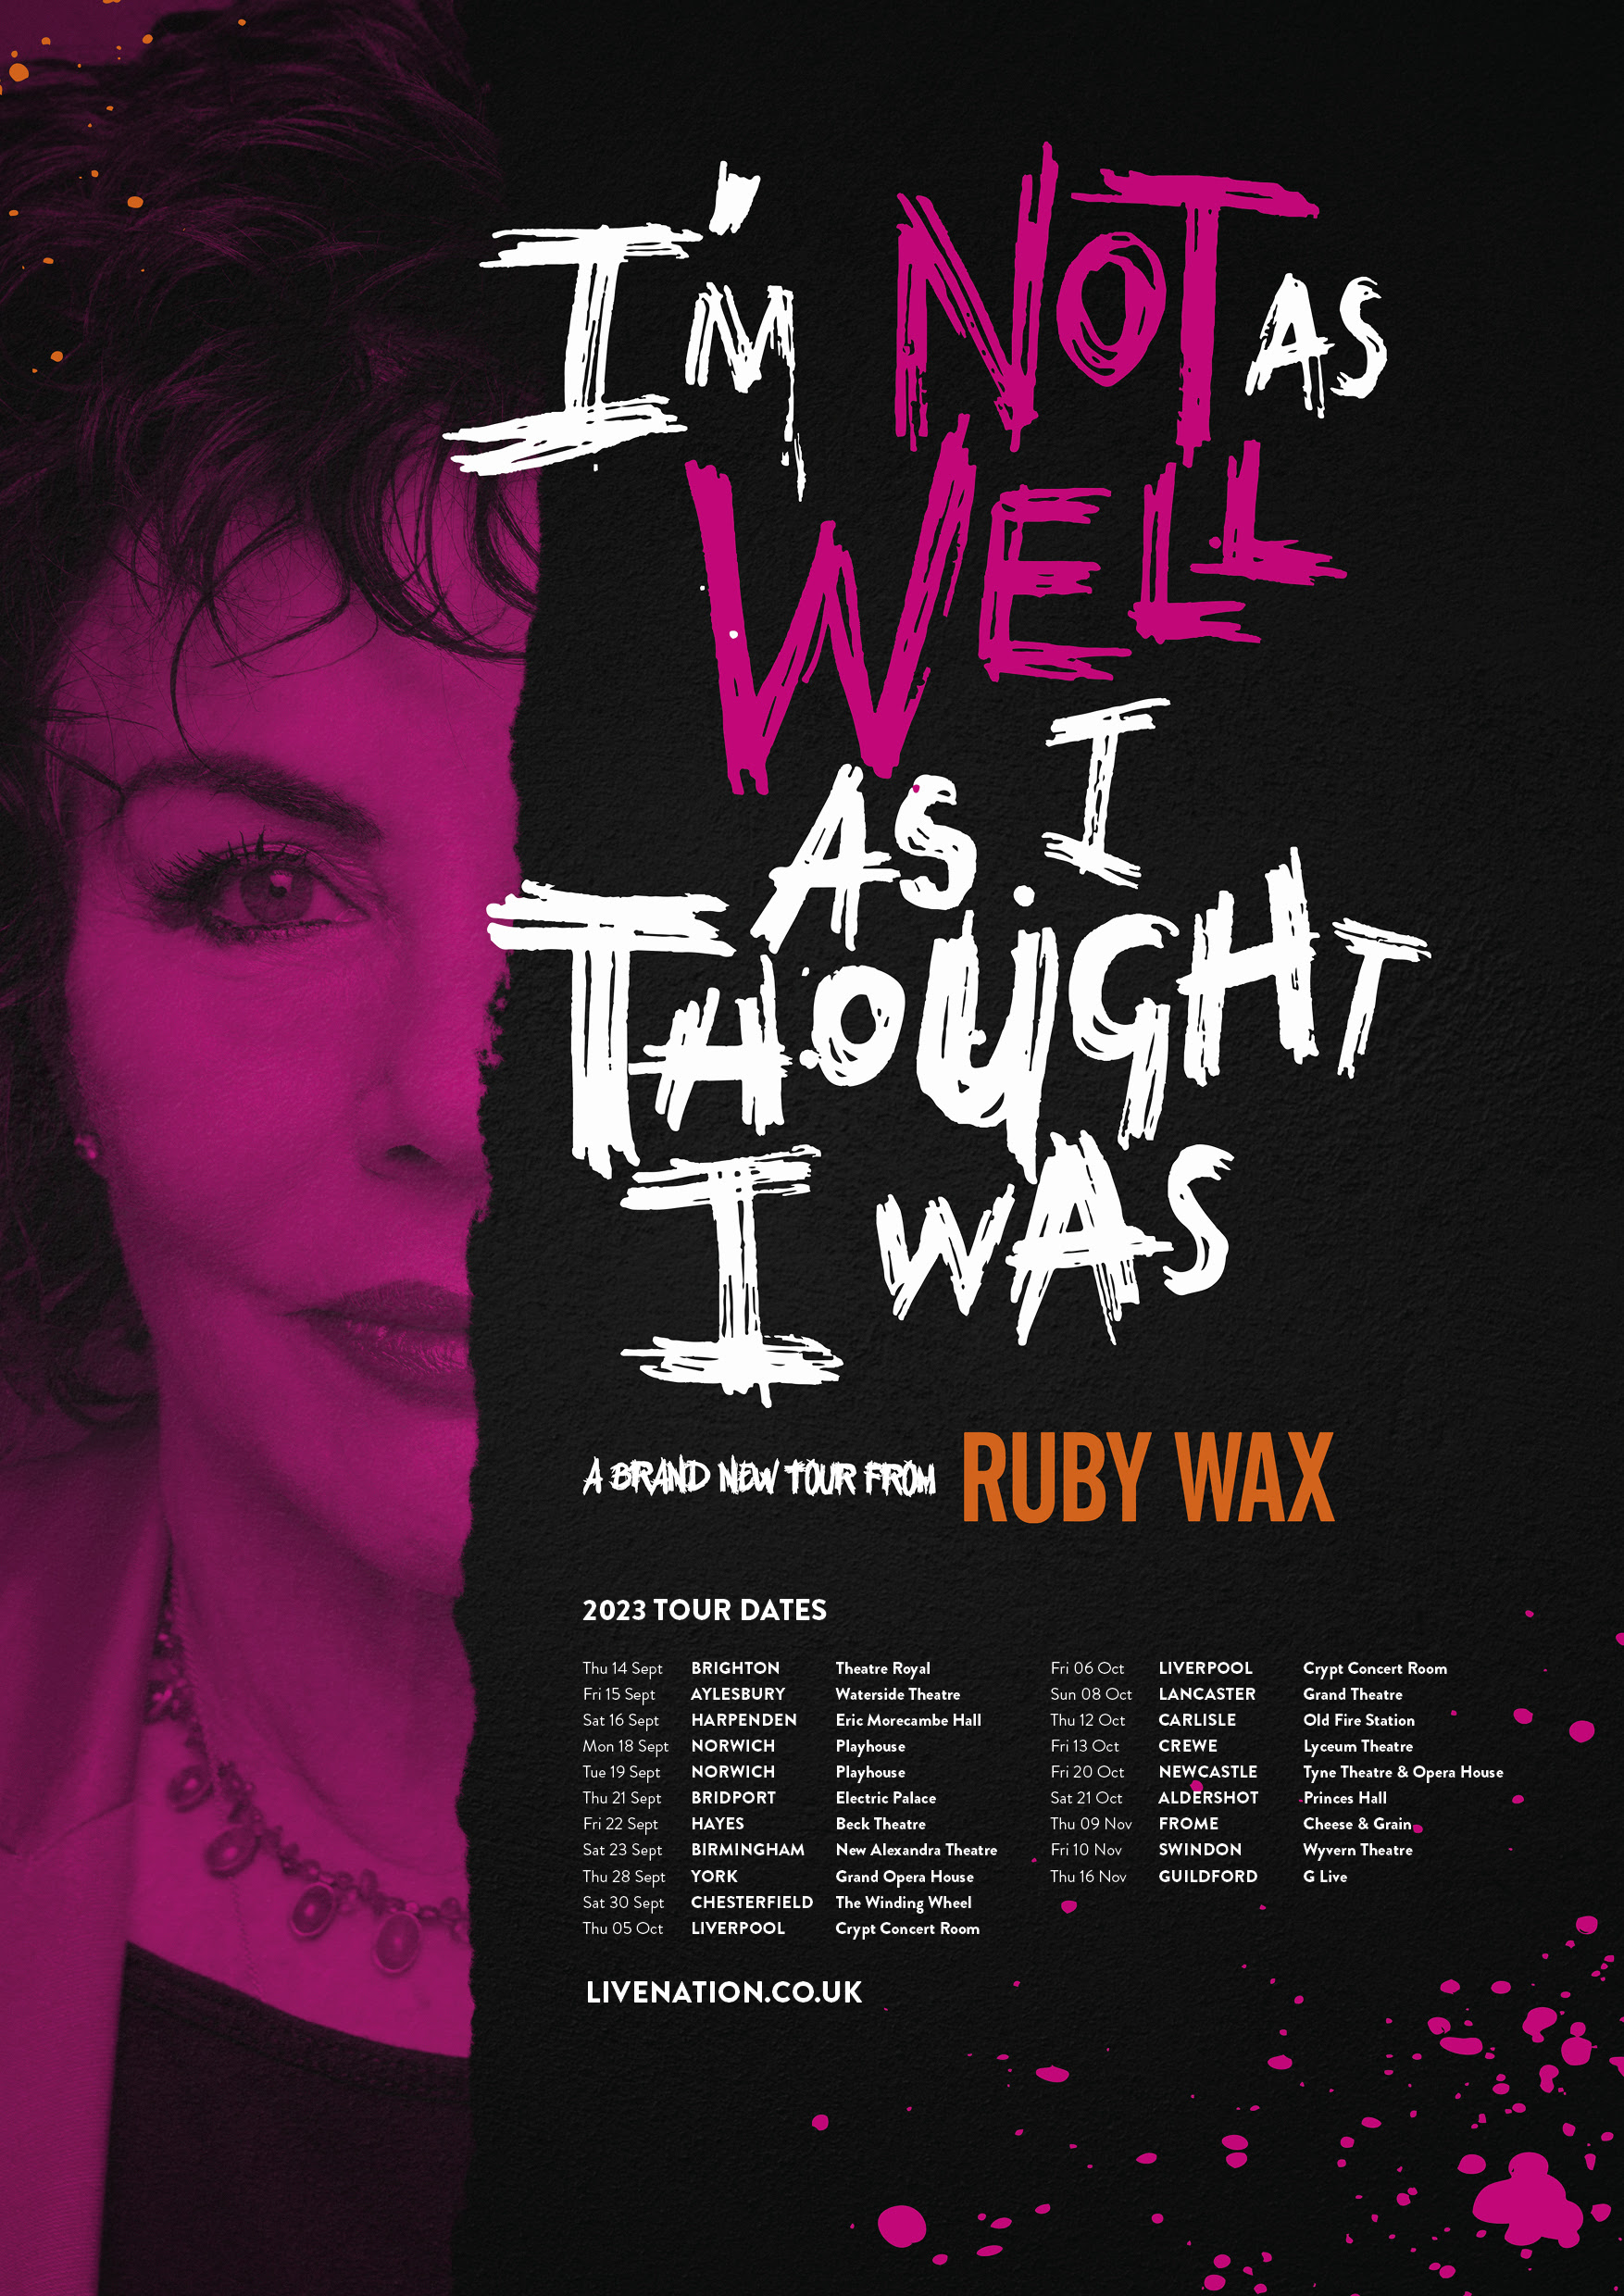 ruby wax on tour